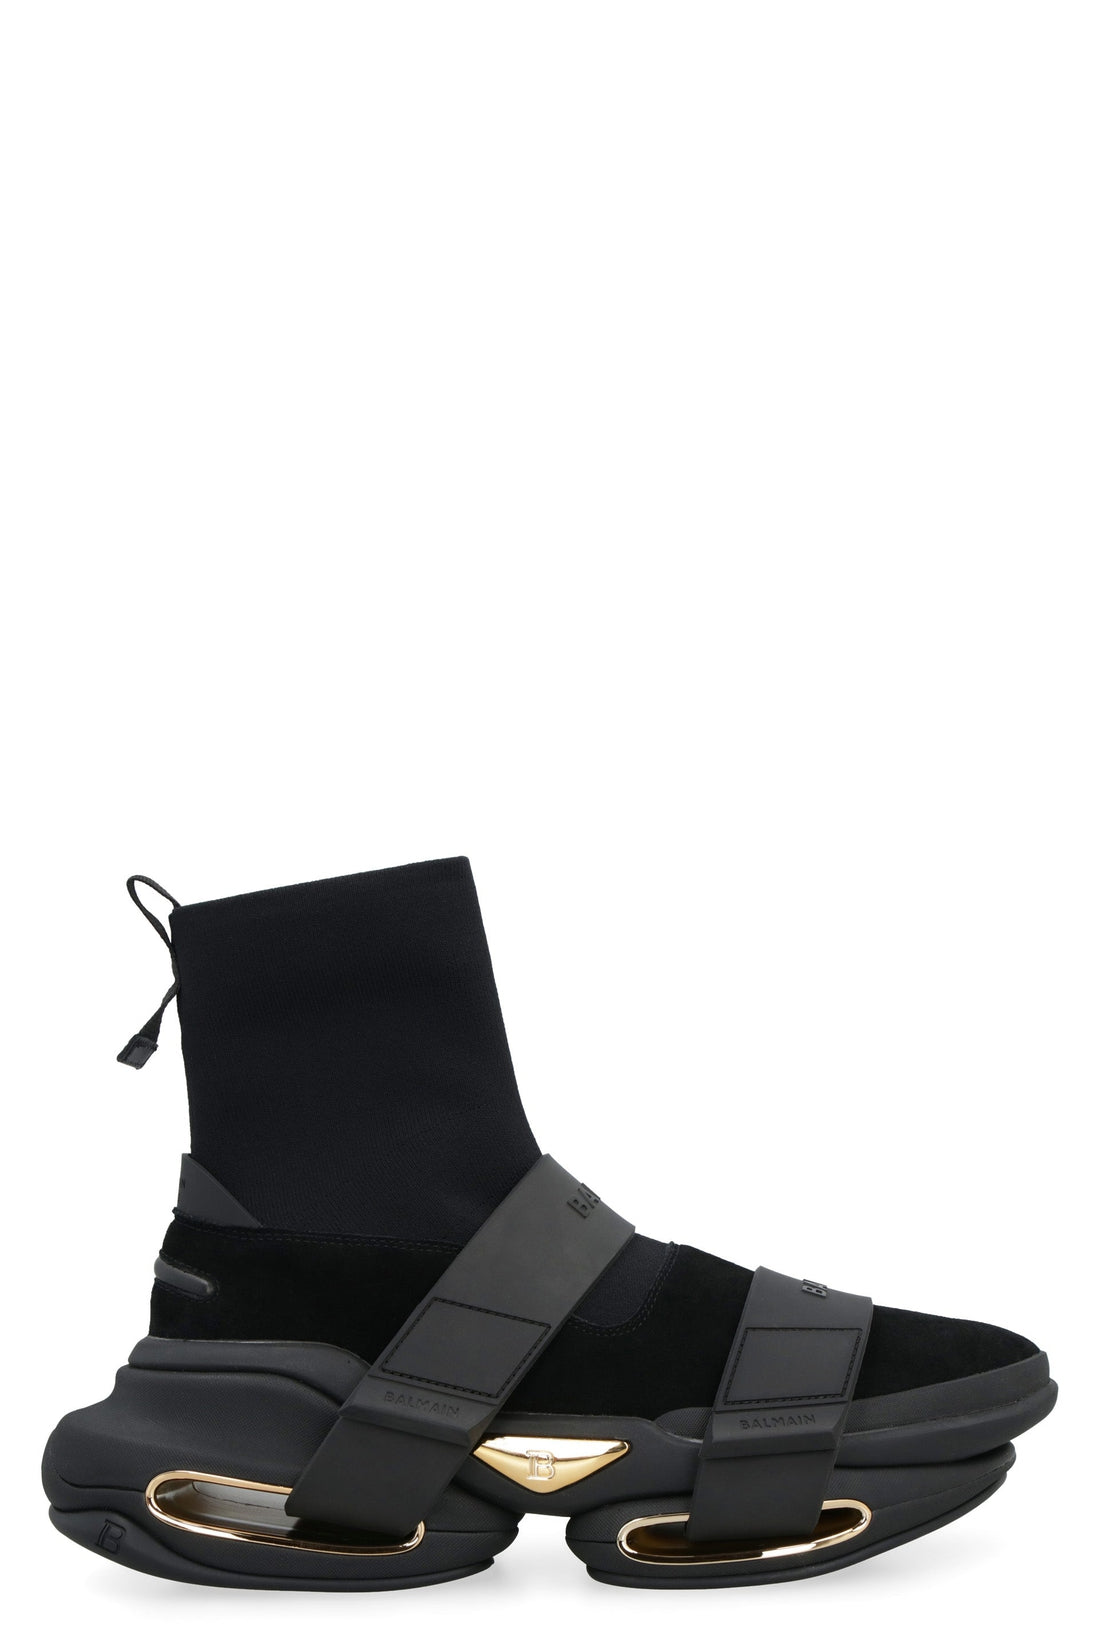 Balmain-OUTLET-SALE-B-Bold knitted sock-style sneakers-ARCHIVIST